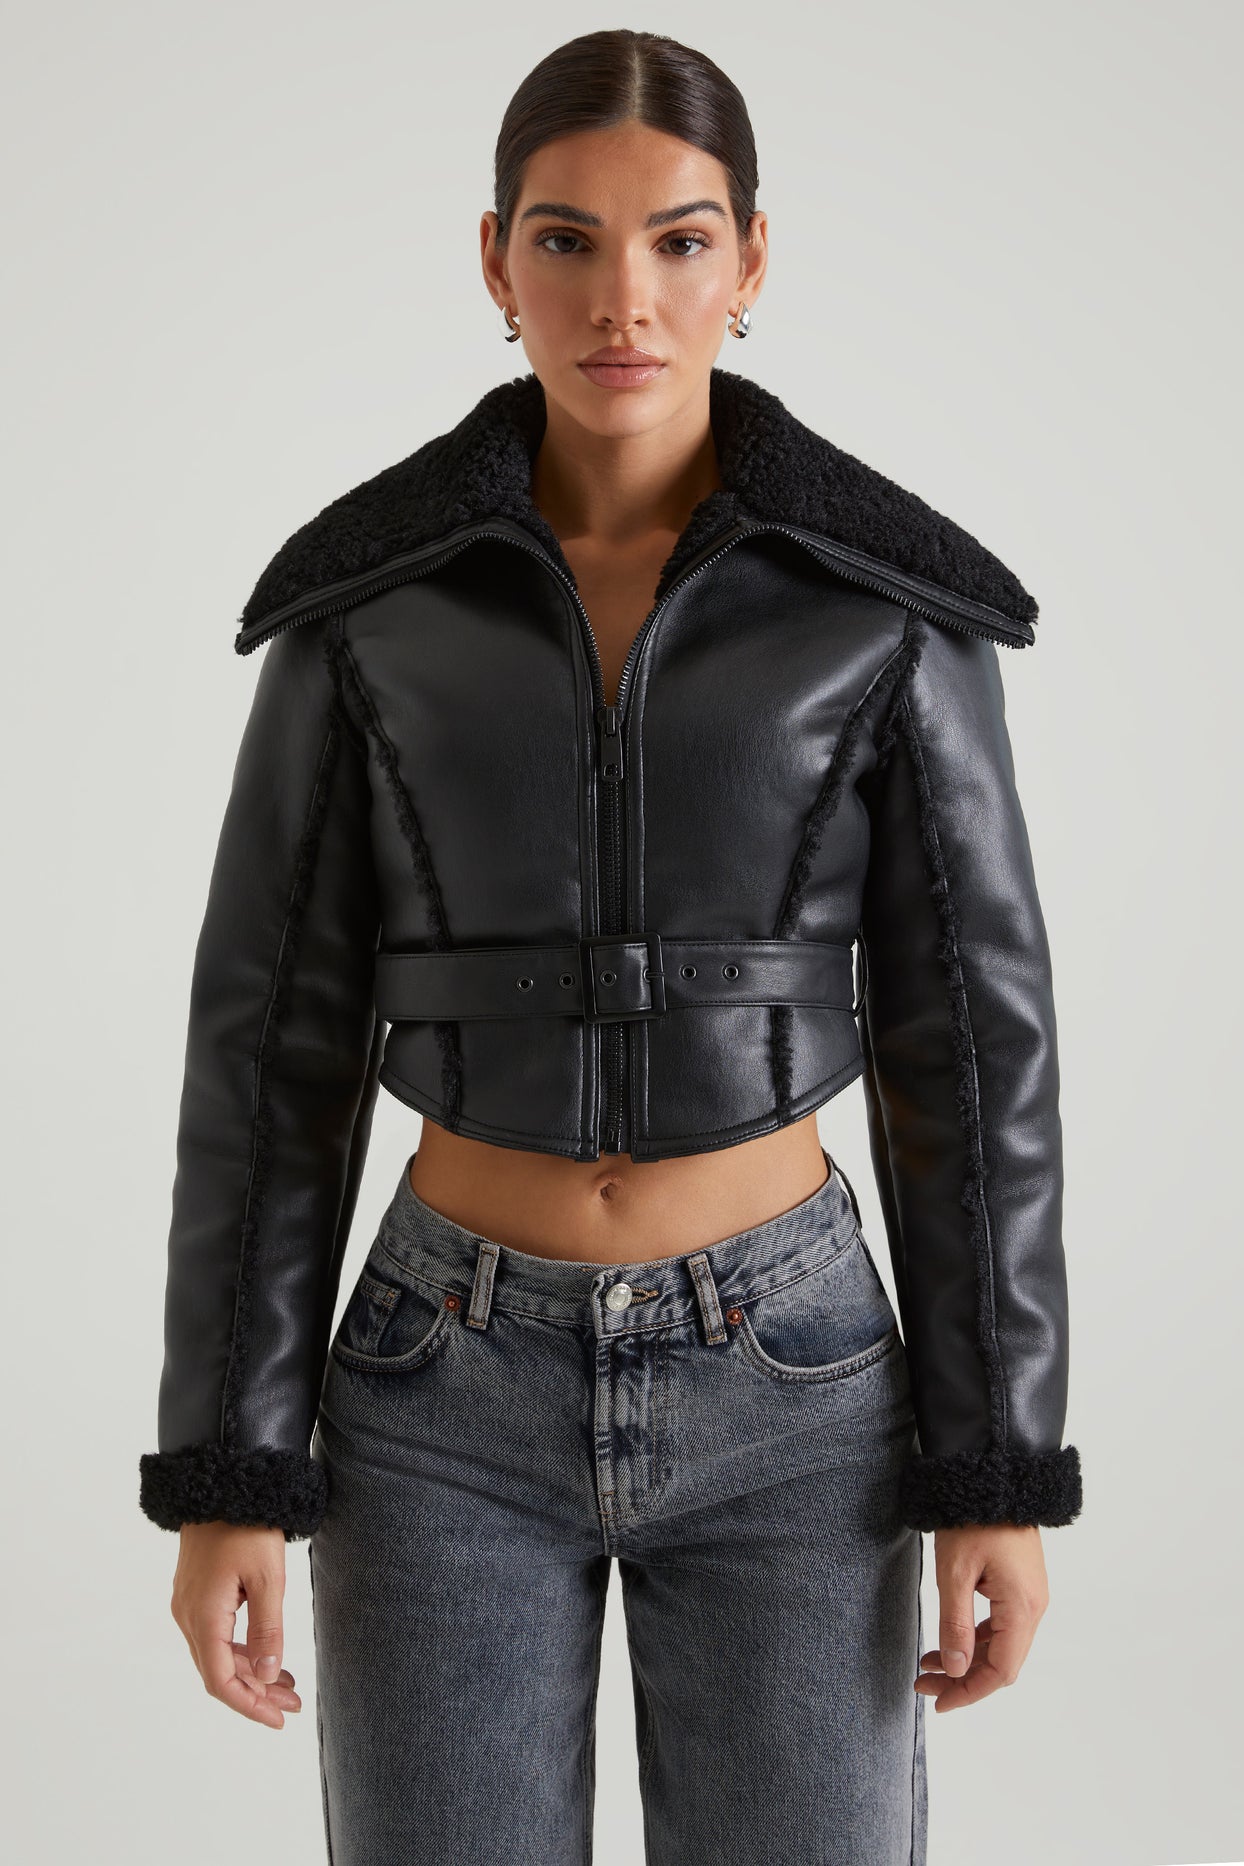 Eira Jacket with Shearling Collar and Trim in Black | Oh Polly